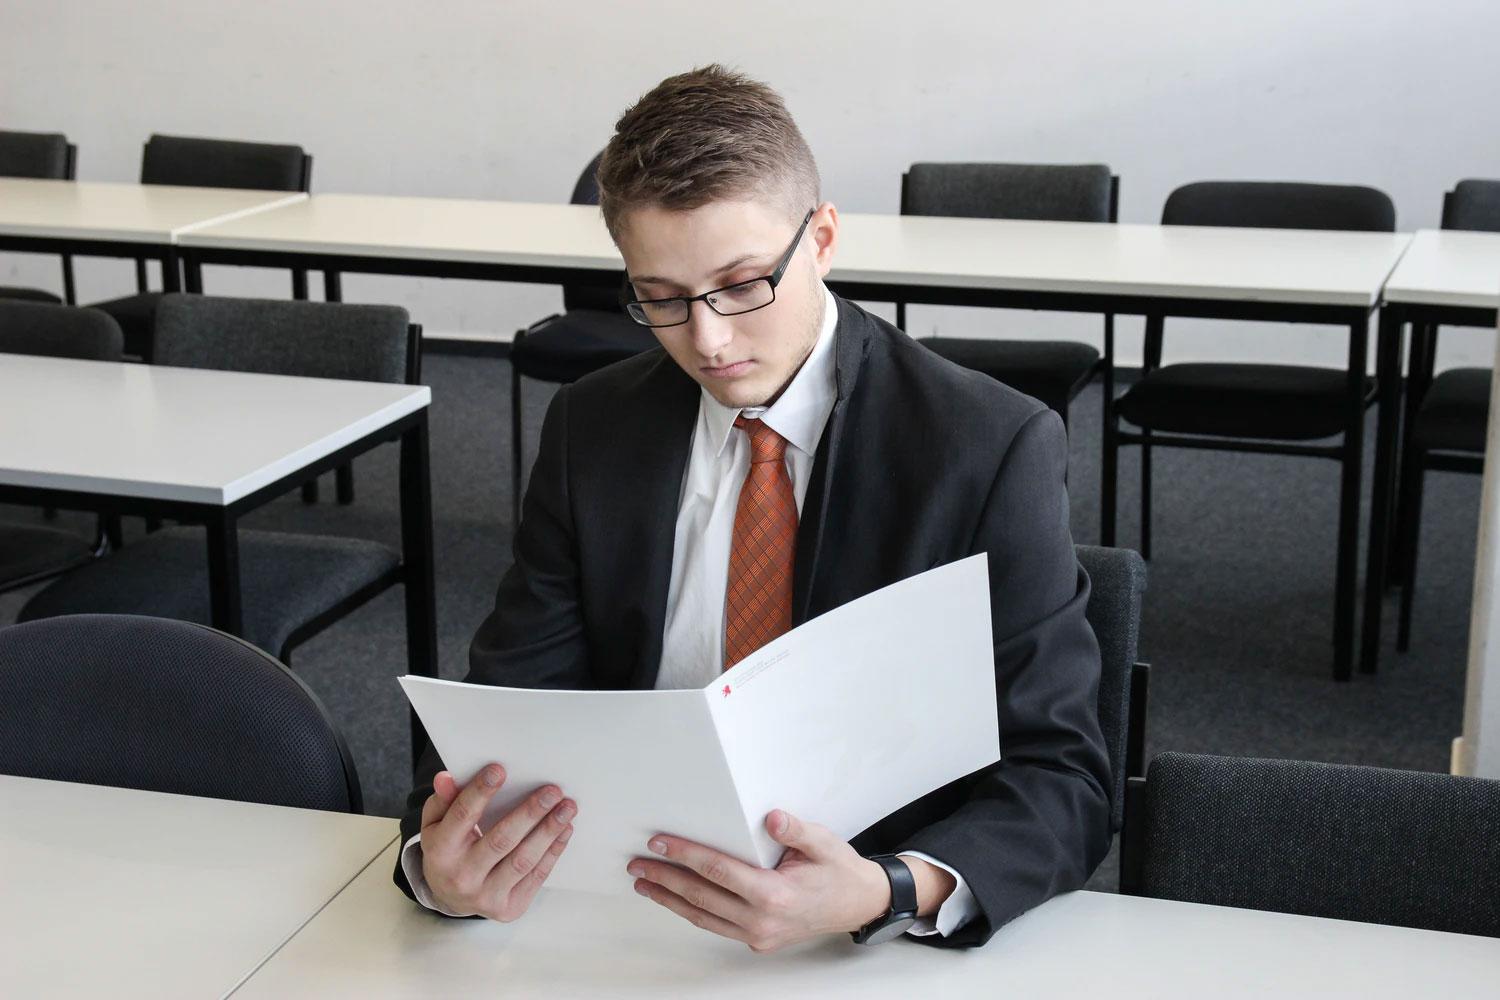 image of Interview Tips: How to Be Confident in an Interview